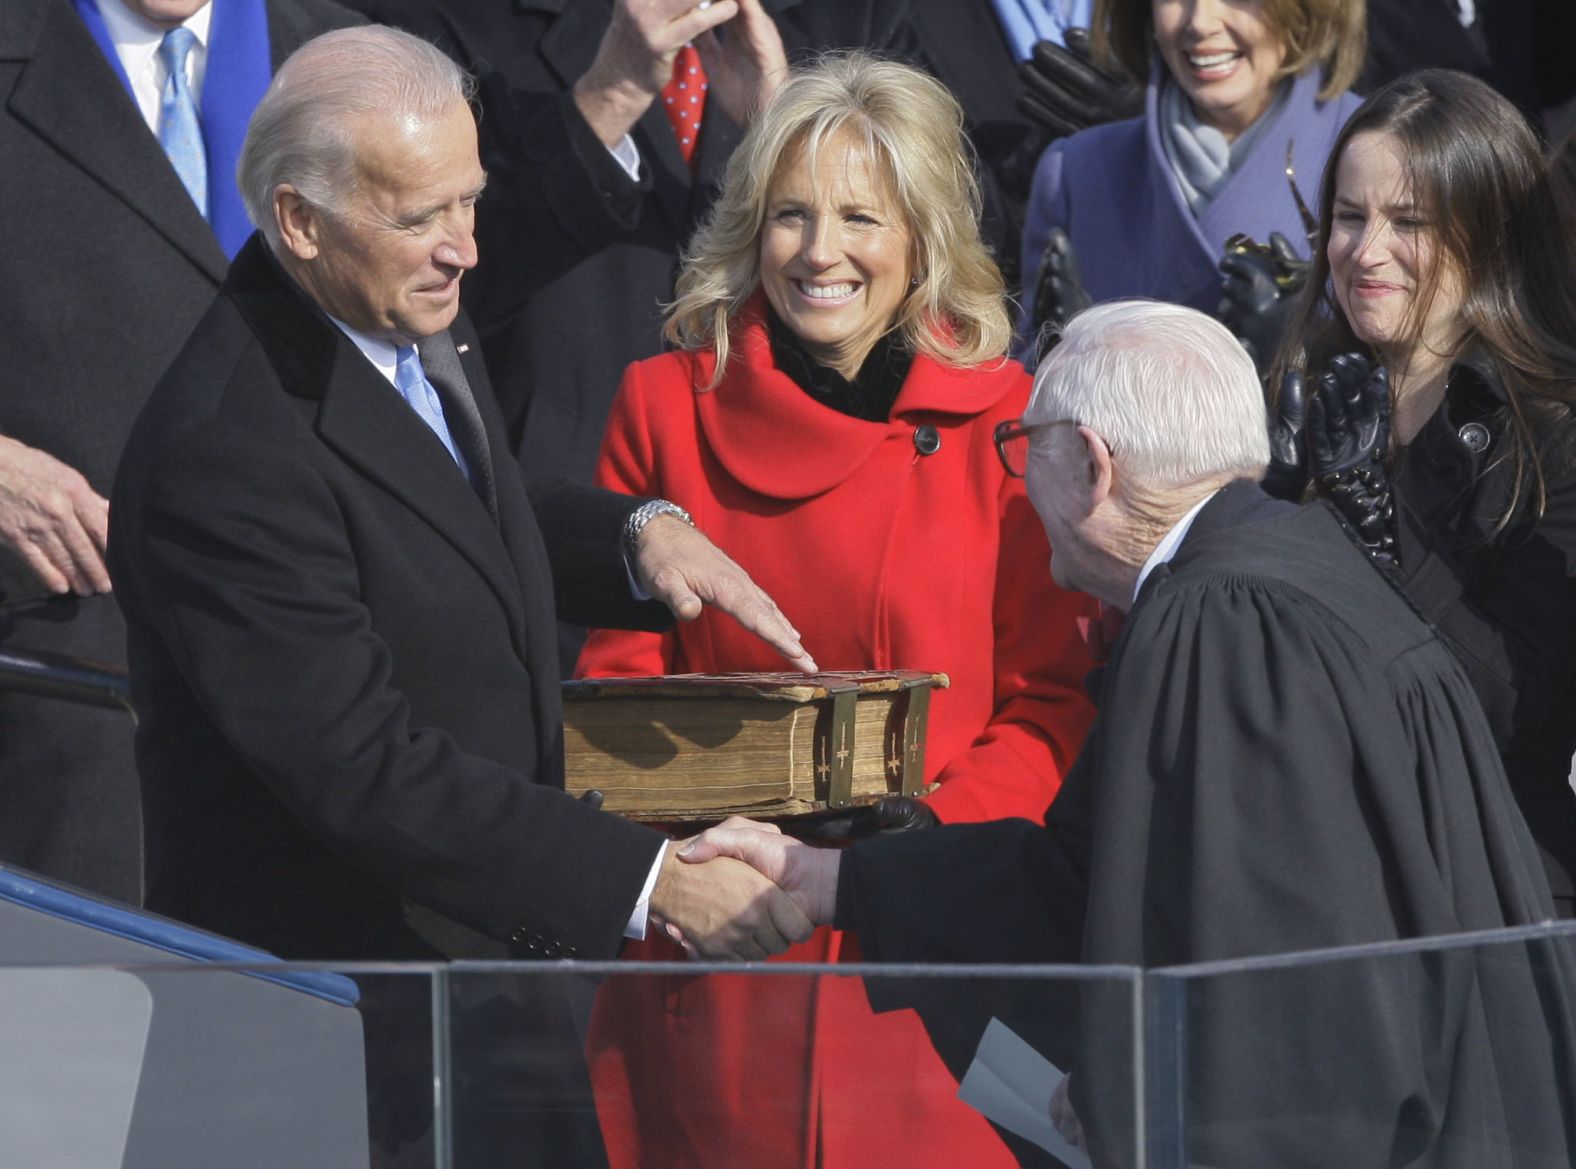 Former Vice President Joe Biden shakes hands with Stevens after taking the oath of office on January 20, 2009. Biden's wife, Jill, is at his side.